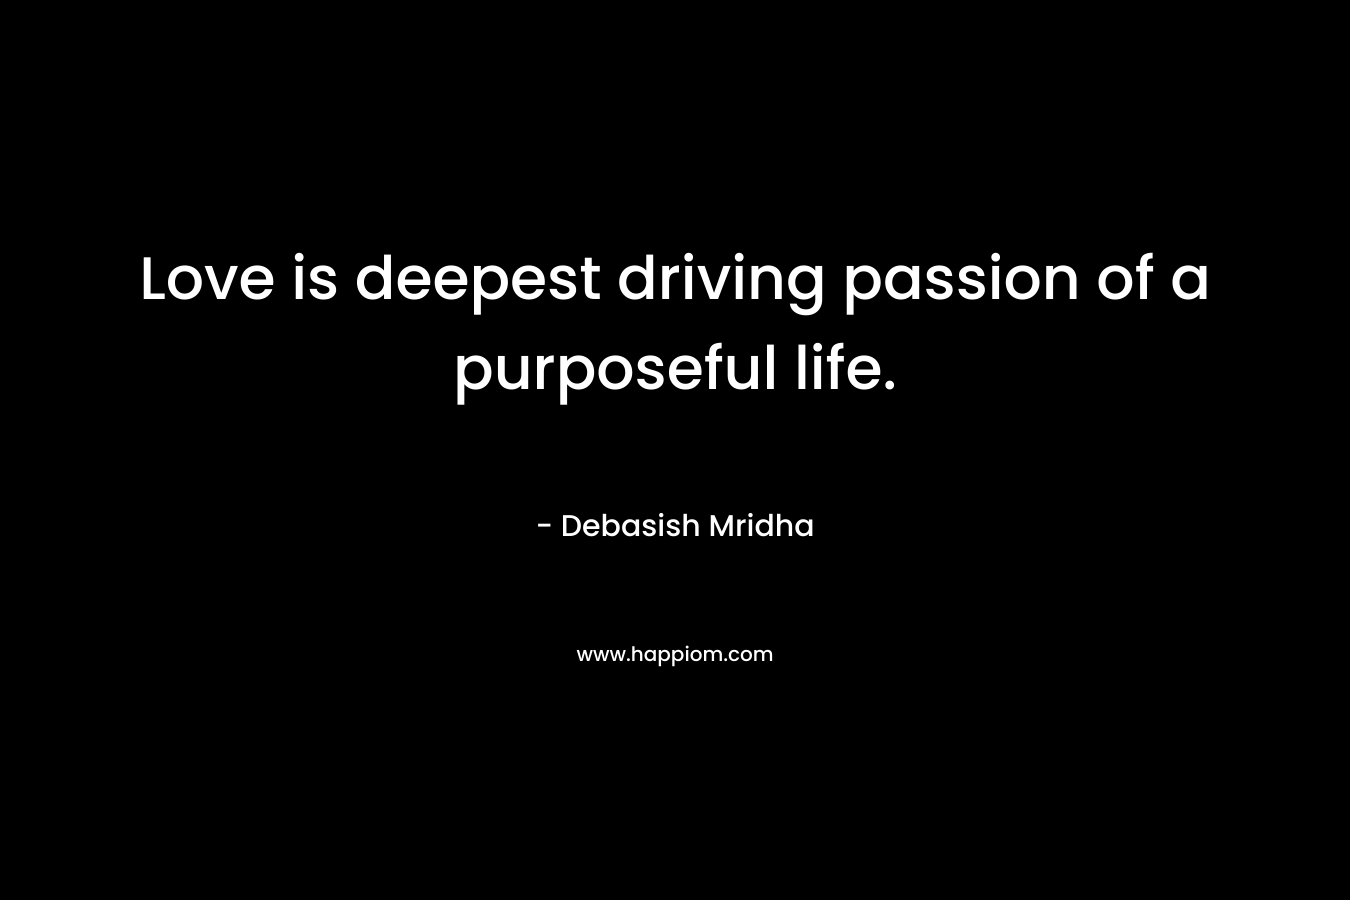 Love is deepest driving passion of a purposeful life.